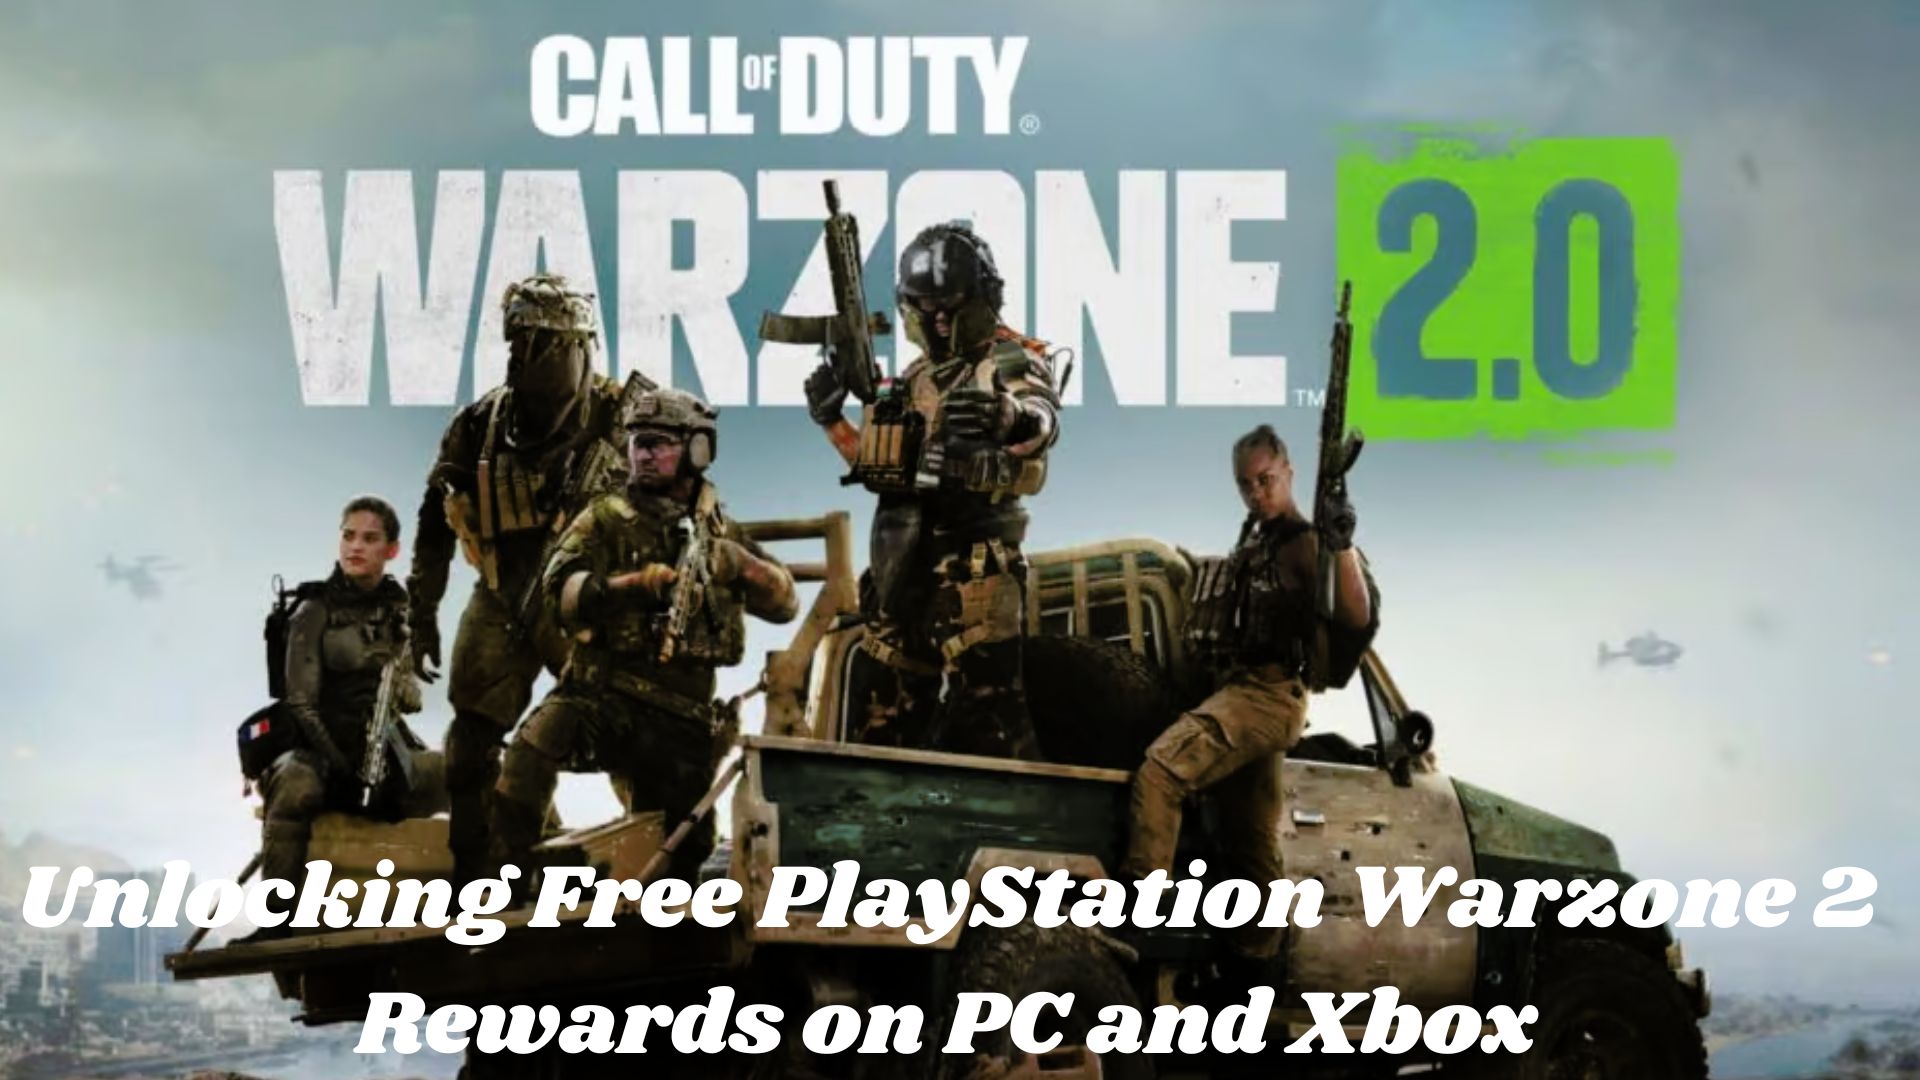 How to Unlocking Free PlayStation Warzone 2 Rewards on PC and Xbox: Your Complete Guide 2023